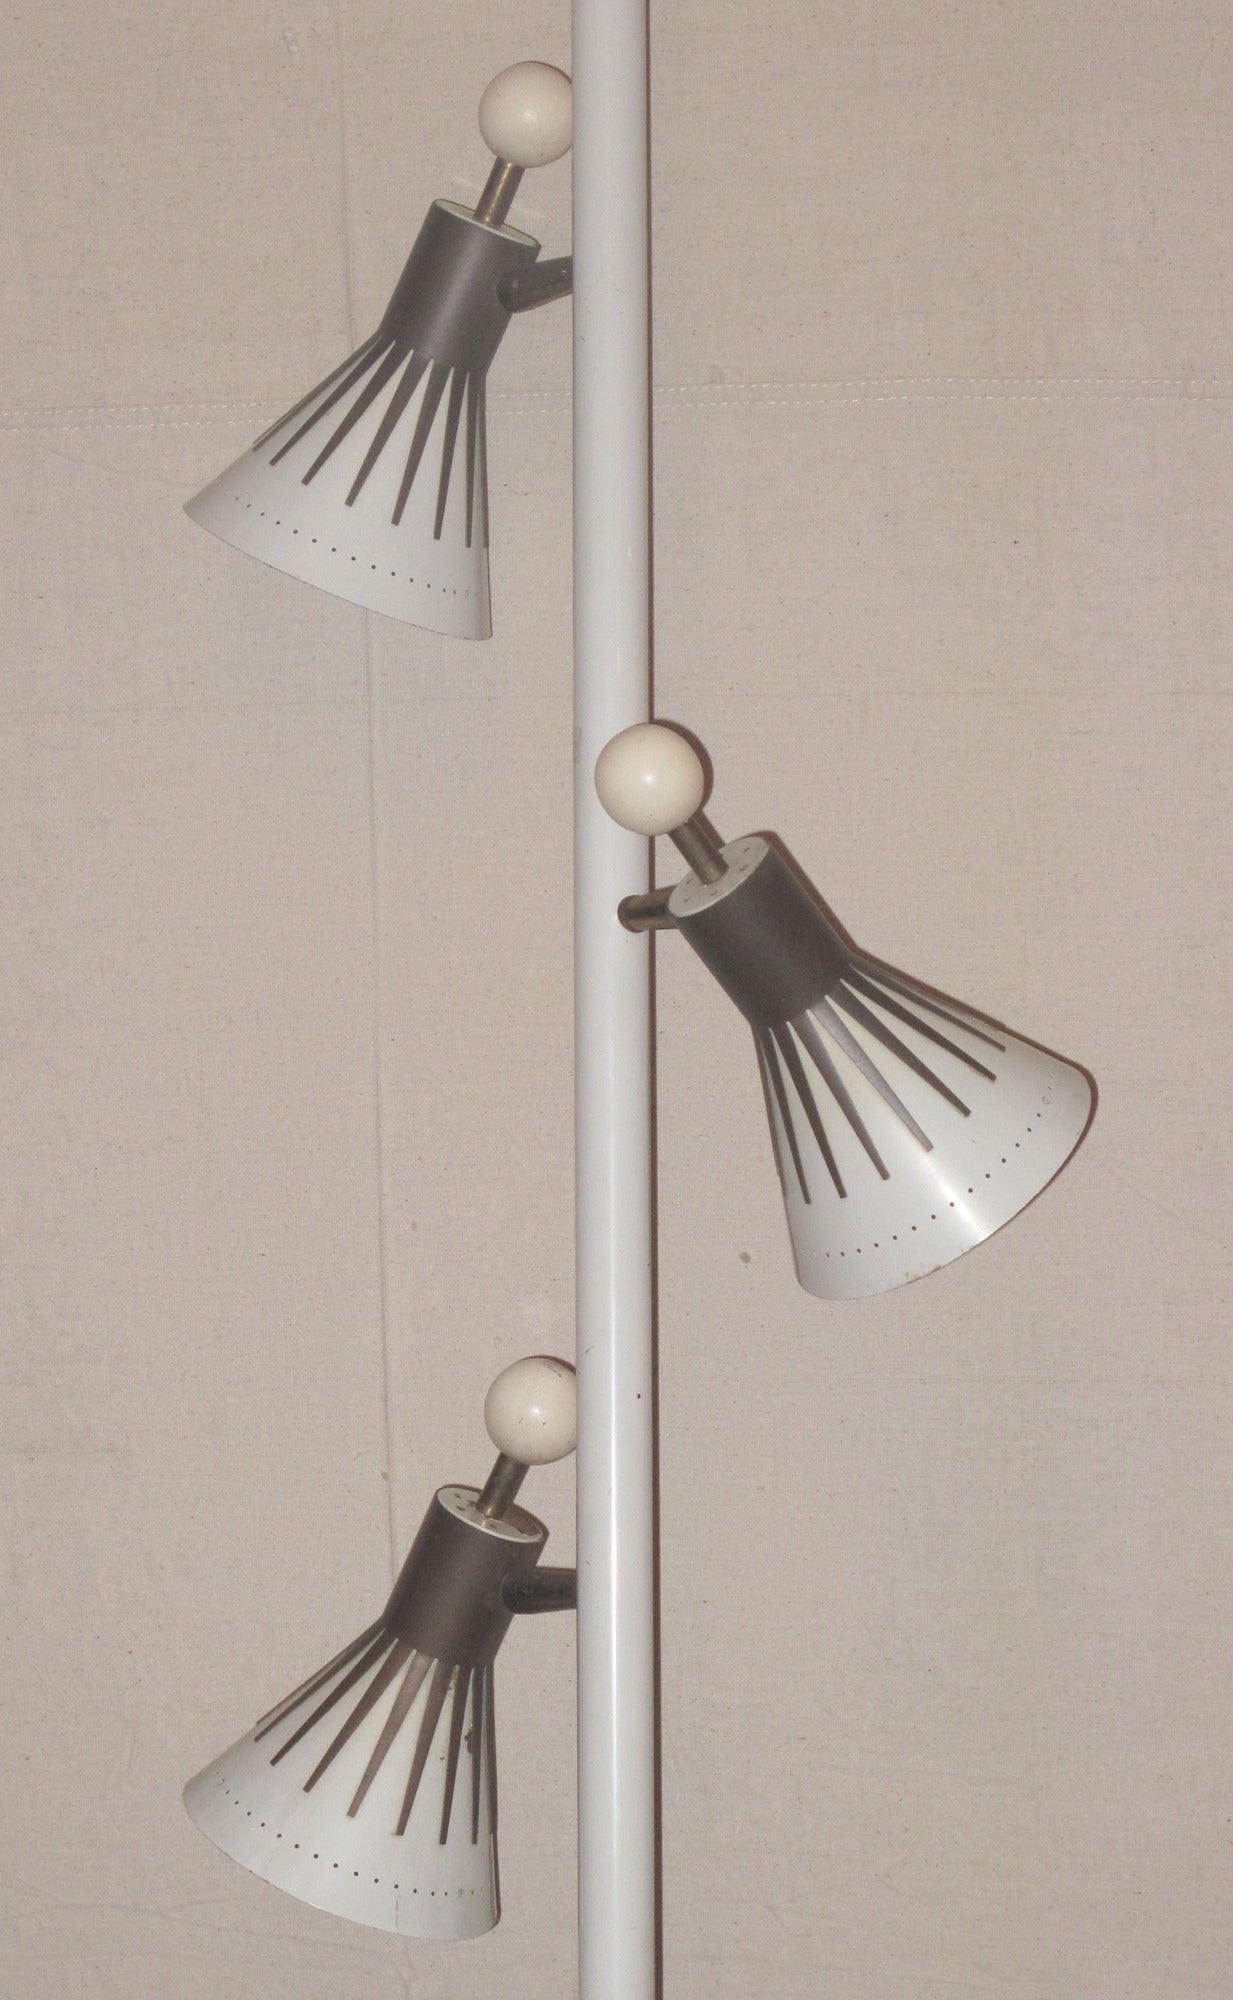 The brass and painted metal pole mounted with three lights with painted shades mounted with metal ray decoration and wood ball finials. Pole is 105